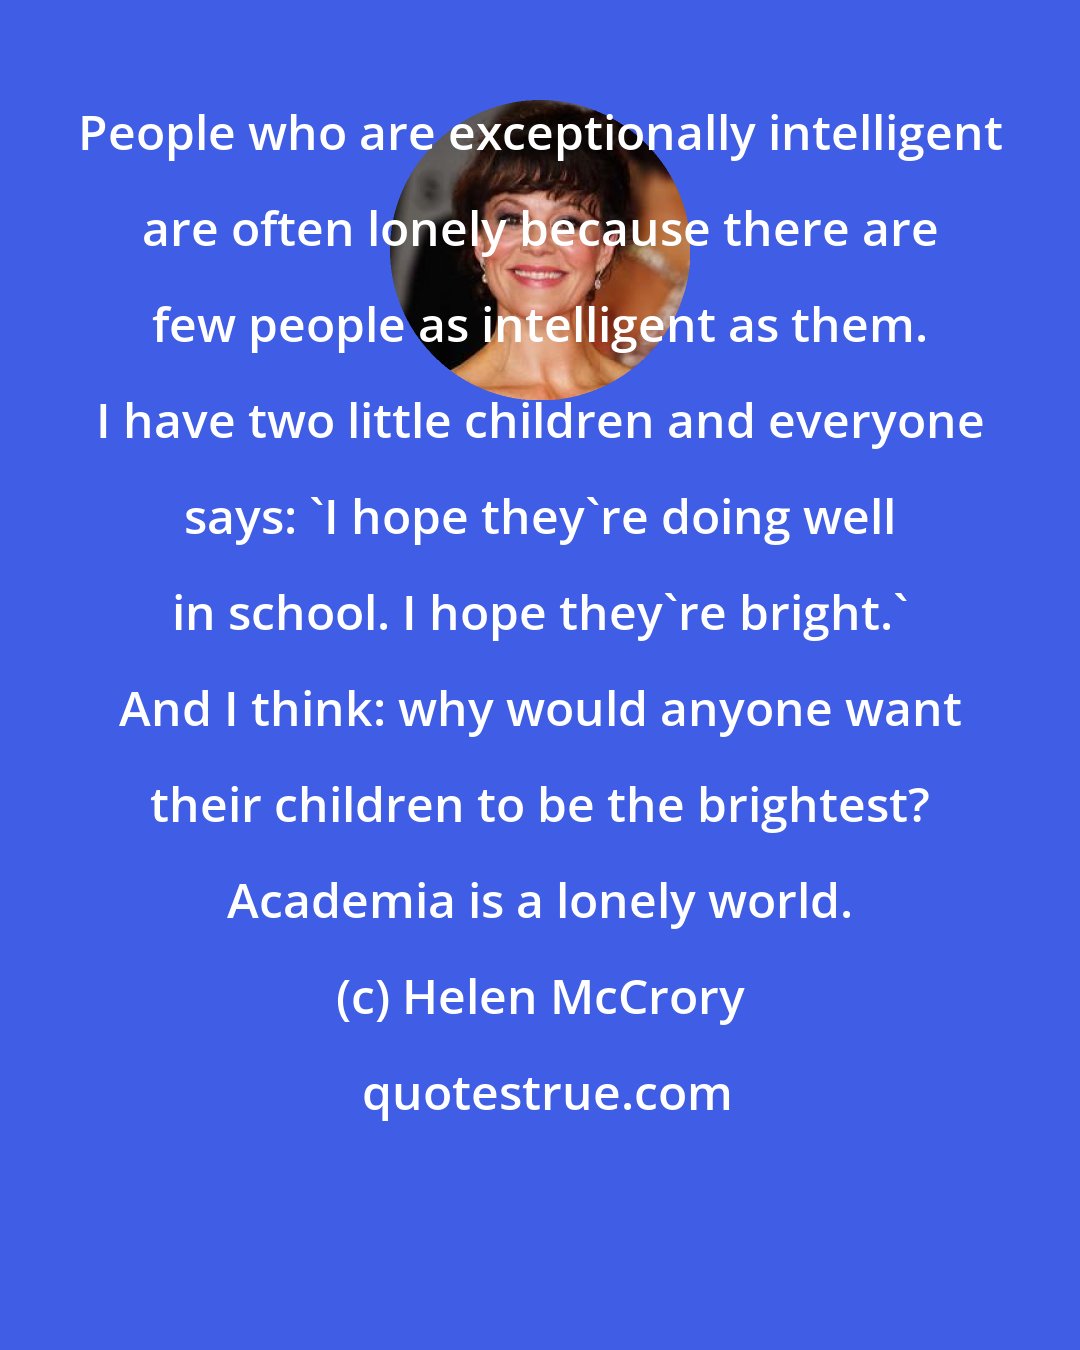 Helen McCrory: People who are exceptionally intelligent are often lonely because there are few people as intelligent as them. I have two little children and everyone says: 'I hope they're doing well in school. I hope they're bright.' And I think: why would anyone want their children to be the brightest? Academia is a lonely world.